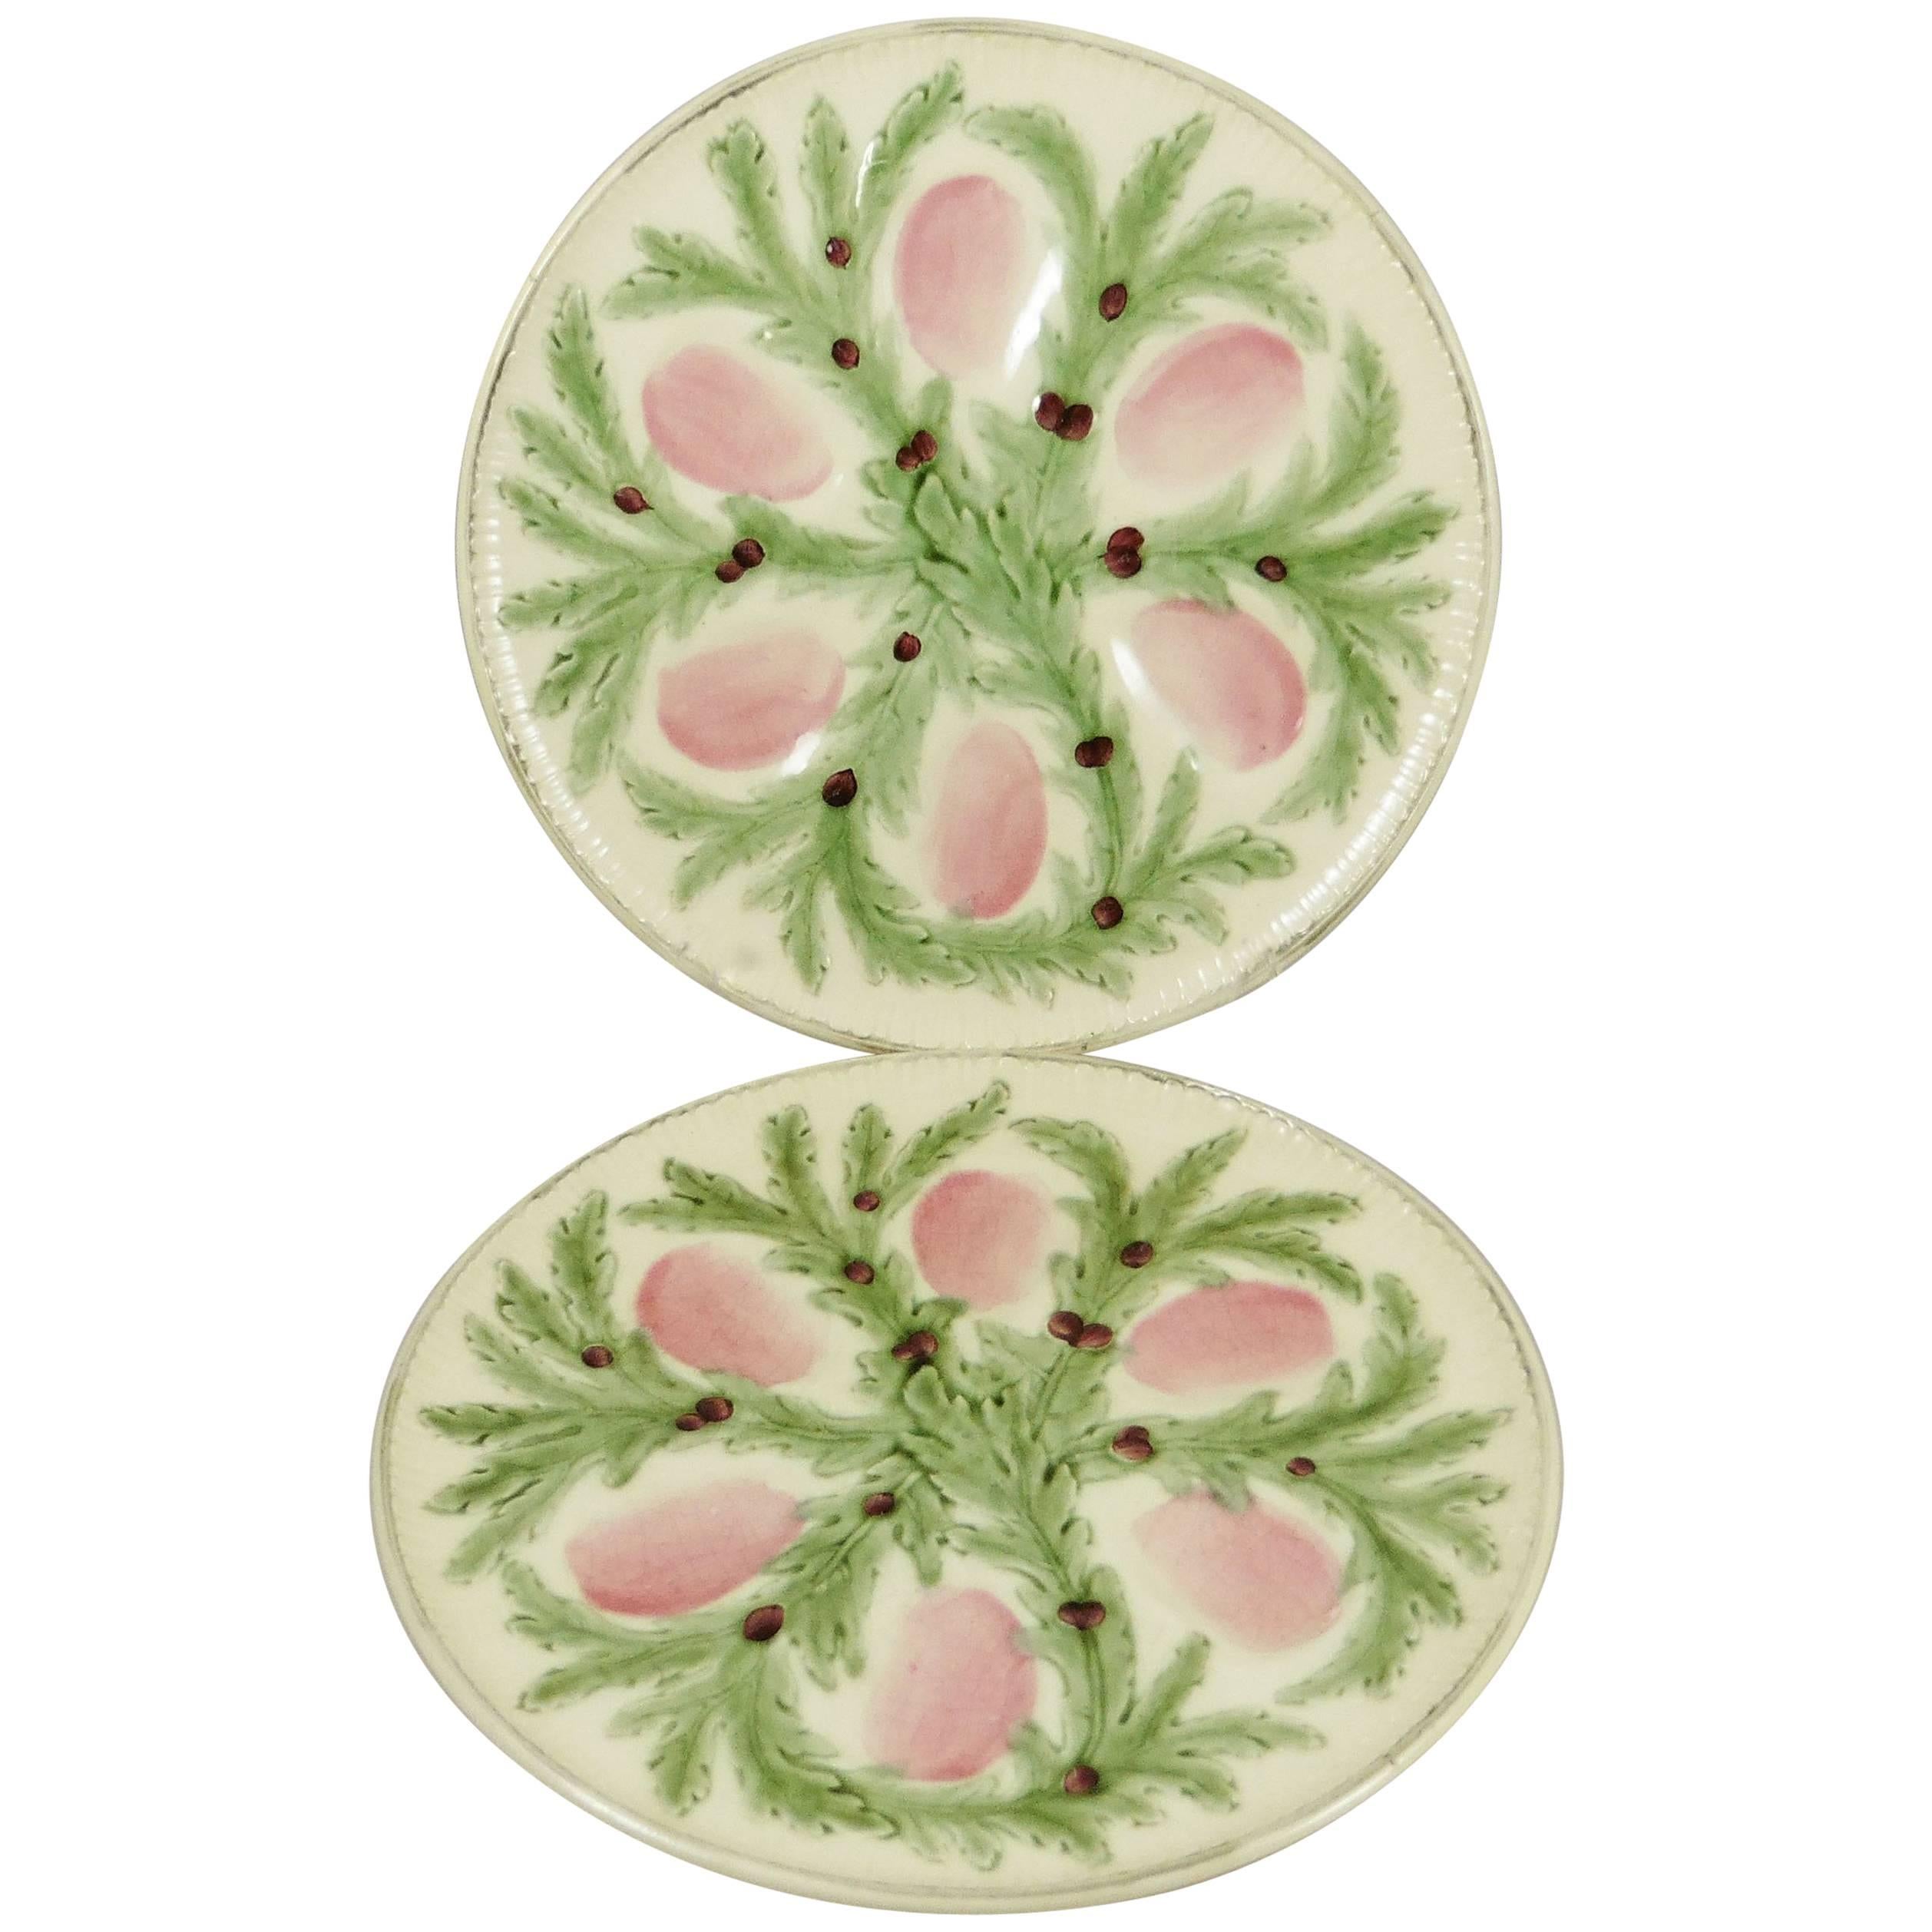 Very decorative Majolica oyster plate signed Hippolyte Boulenger Choisy le Roi. 2 plates available, 600$ each. The six pink wells are surrounded by green seaweeds.